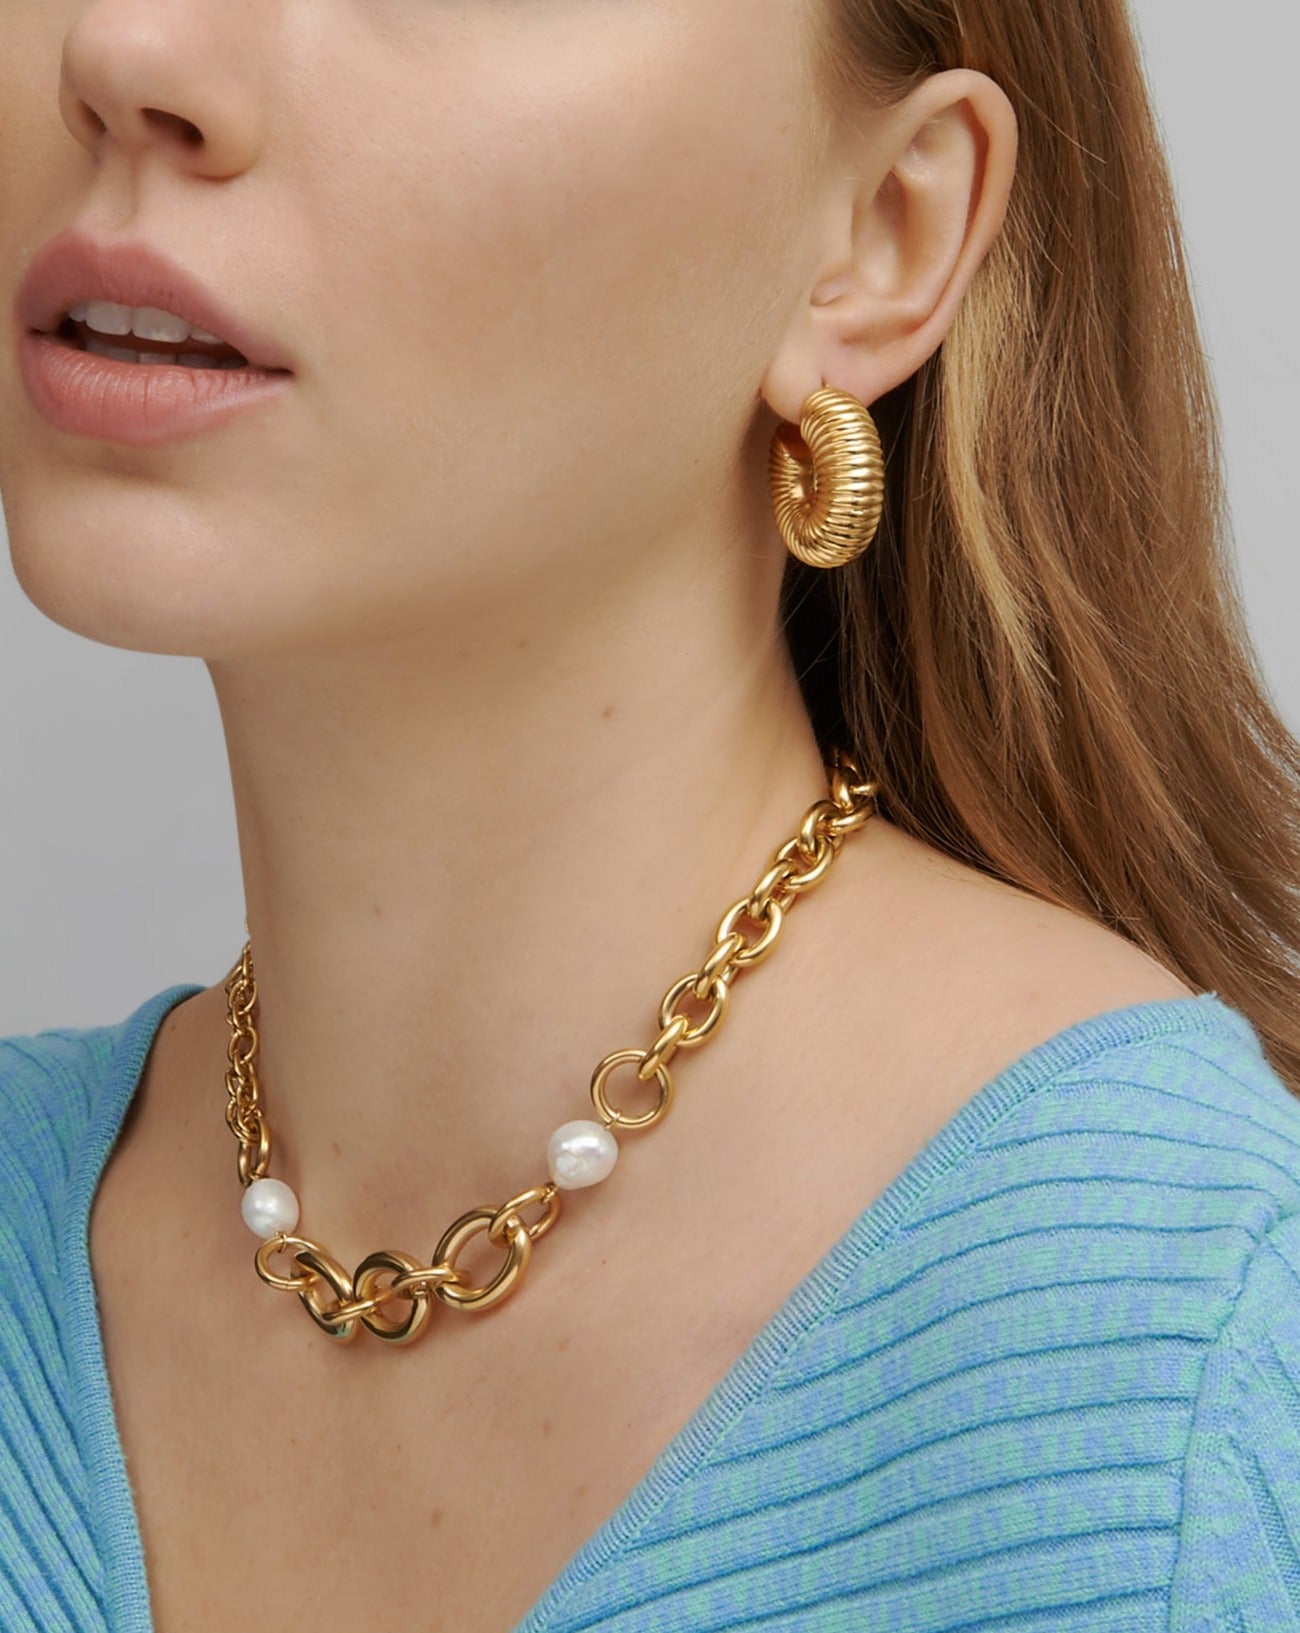 A close-up shot of a person wearing a light blue, ribbed V-neck top, Dahlia Earrings Gold by For Art's Sake®, and a chunky gold chain necklace with pearls. The background is a plain light grey, focusing attention on the jewelry and the intricate ribbed texture of the neckline.